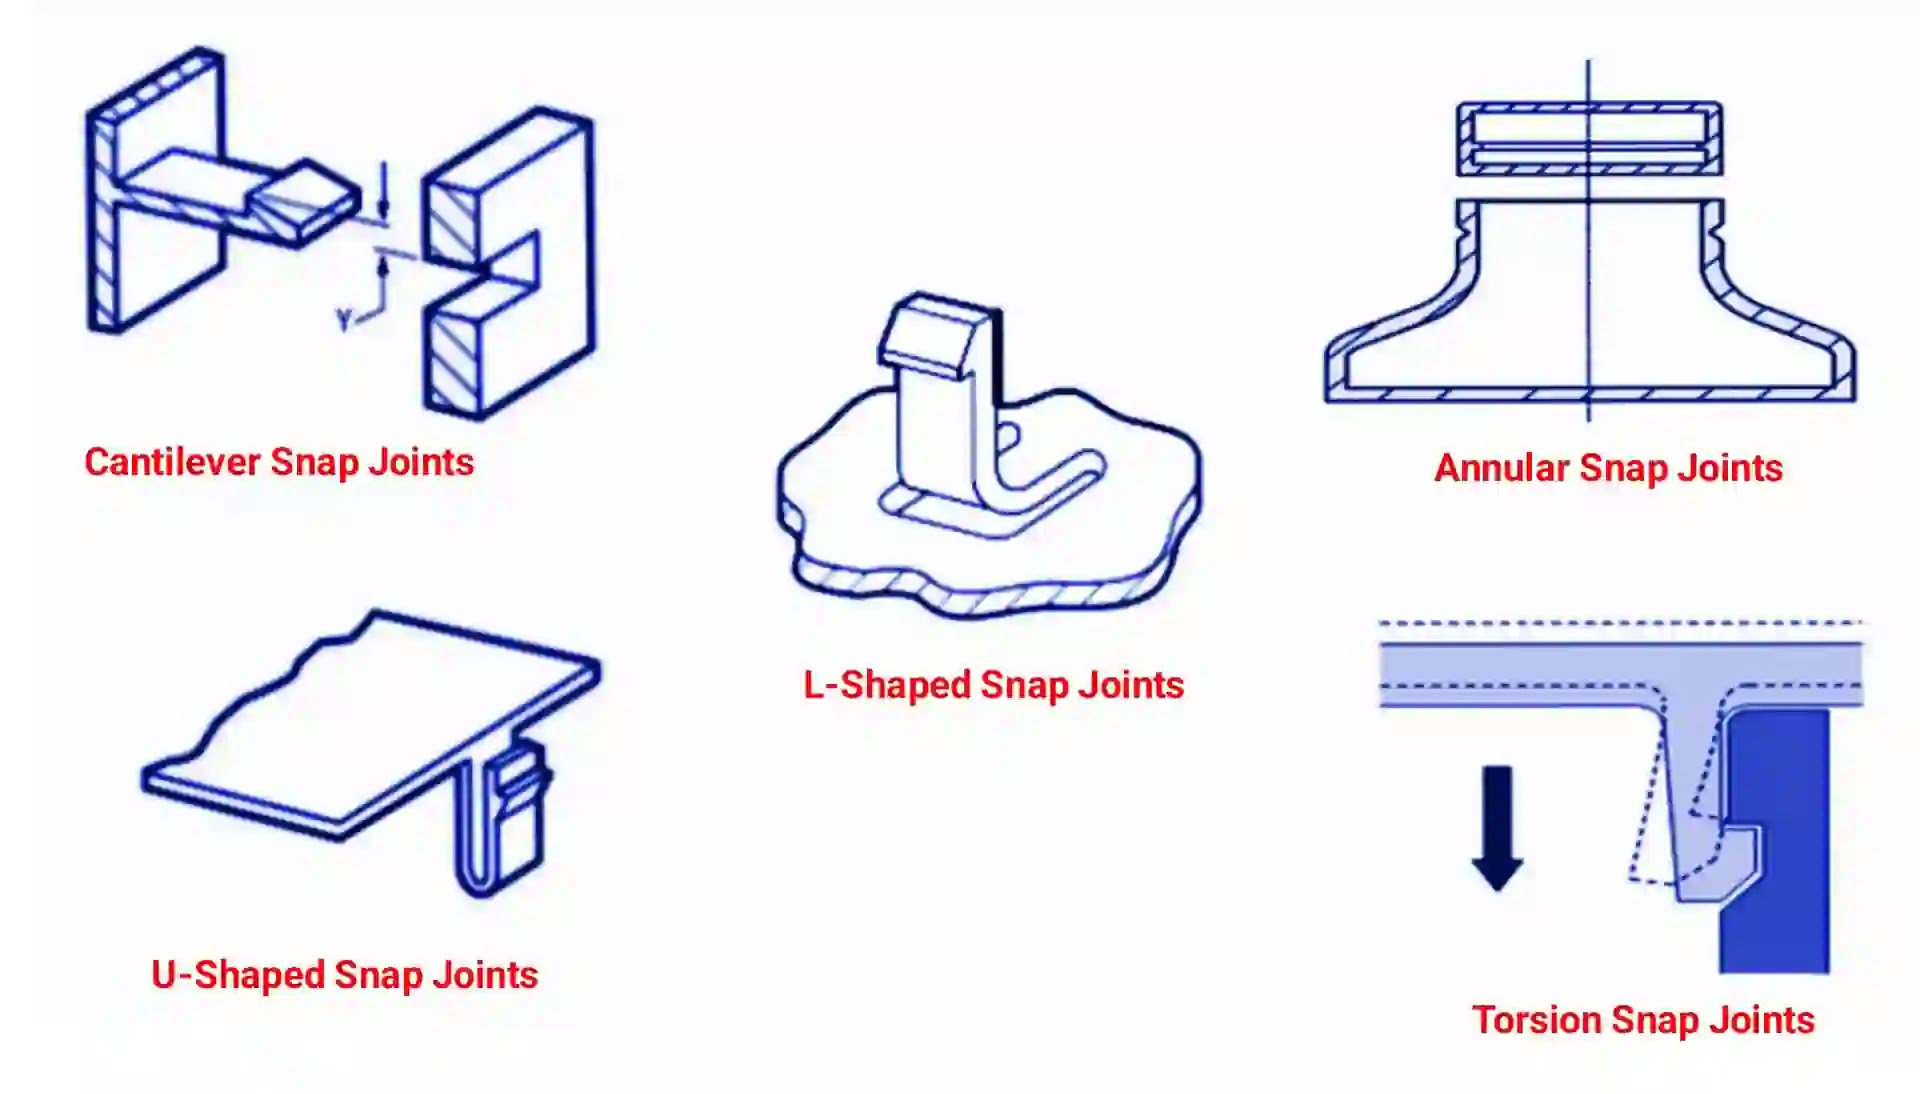 Annular Snap Joints: Applications and Design Considerations